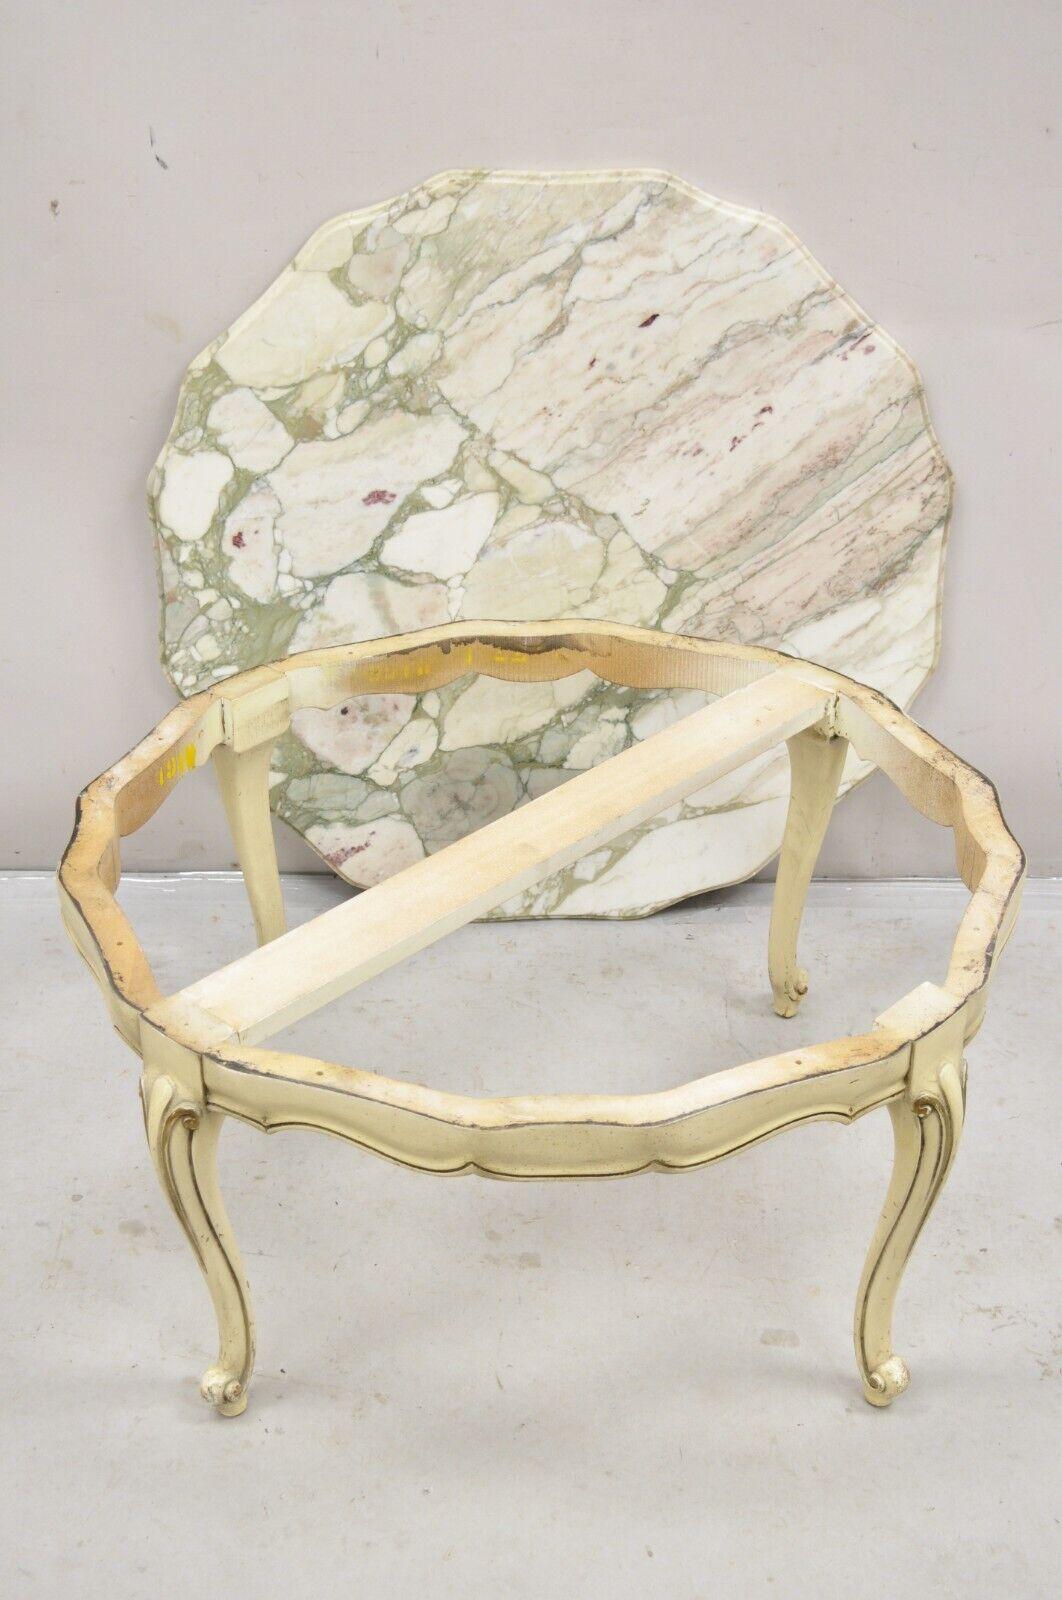 Vintage French Provincial Style Marble Top Cream Painted Round Coffee Table For Sale 1